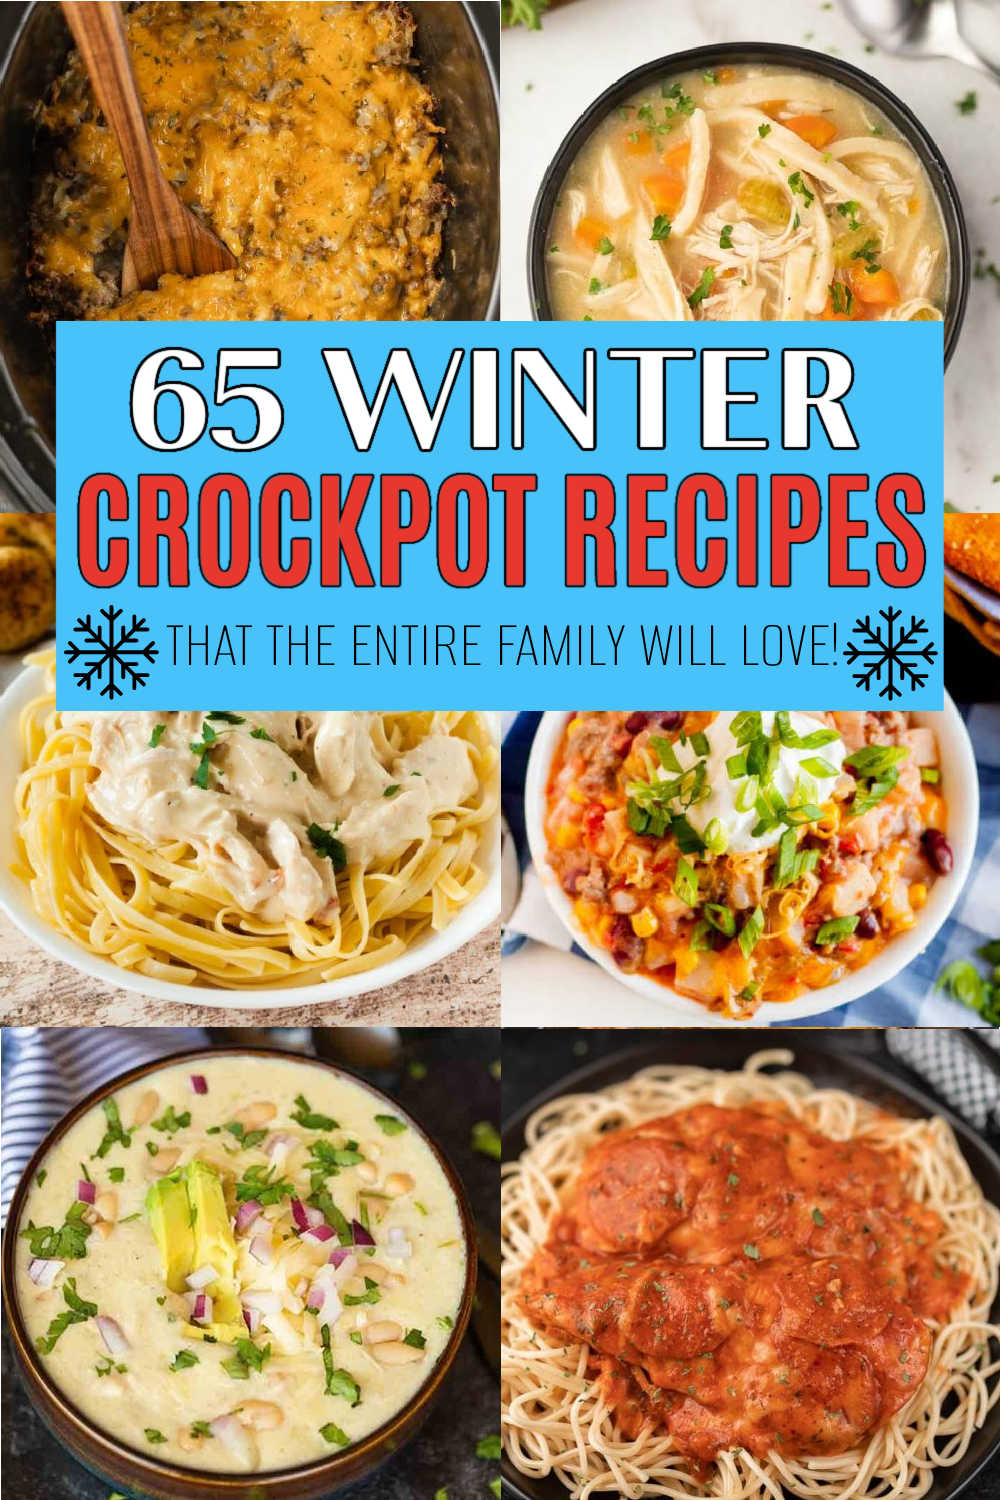 10 Crockpot Recipes Under $5 - Easy Meals Your Family Will Love!